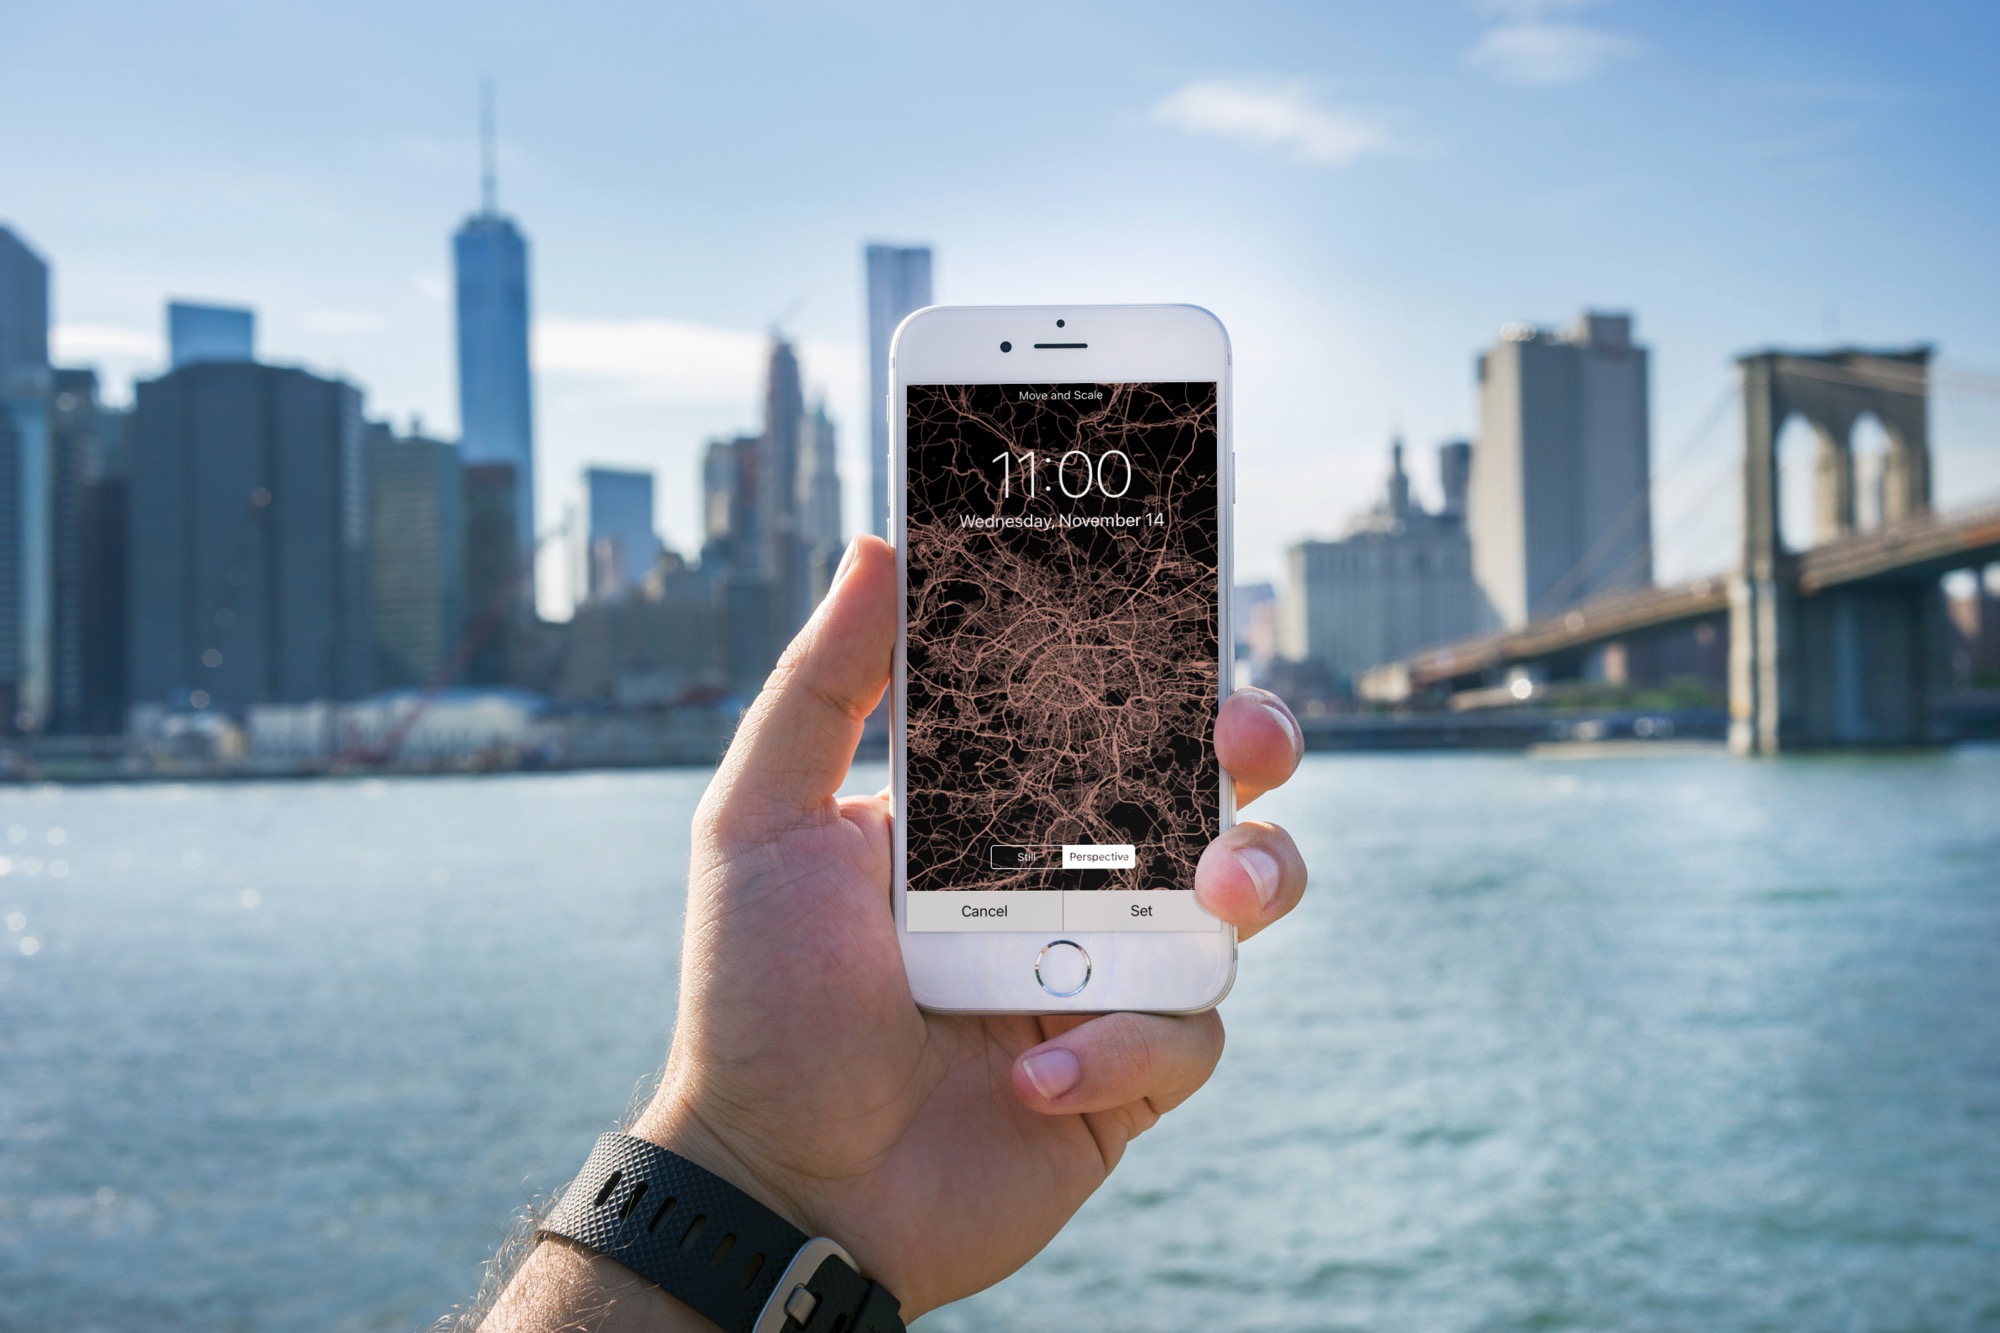 How to create an awesome iPhone wallpaper based on a specific location